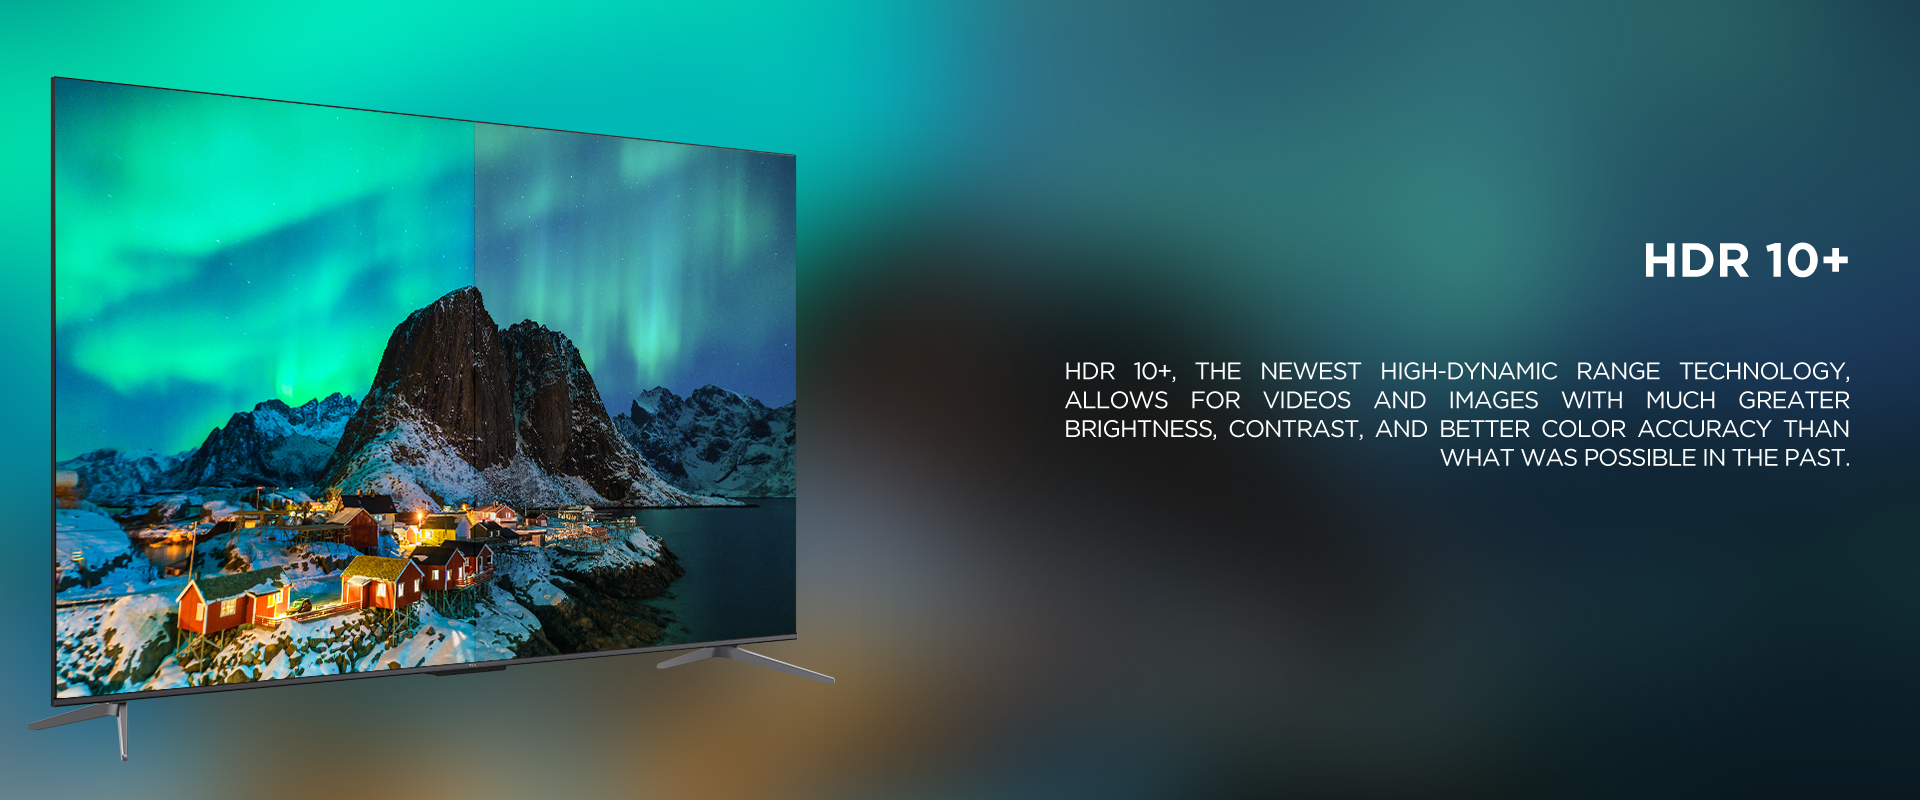 HDR 10+ - HDR 10+, the newest high-dynamic range technology, allows for videos and images with much greater brightness, contrast, and better color accuracy than what was possible in the past. 
